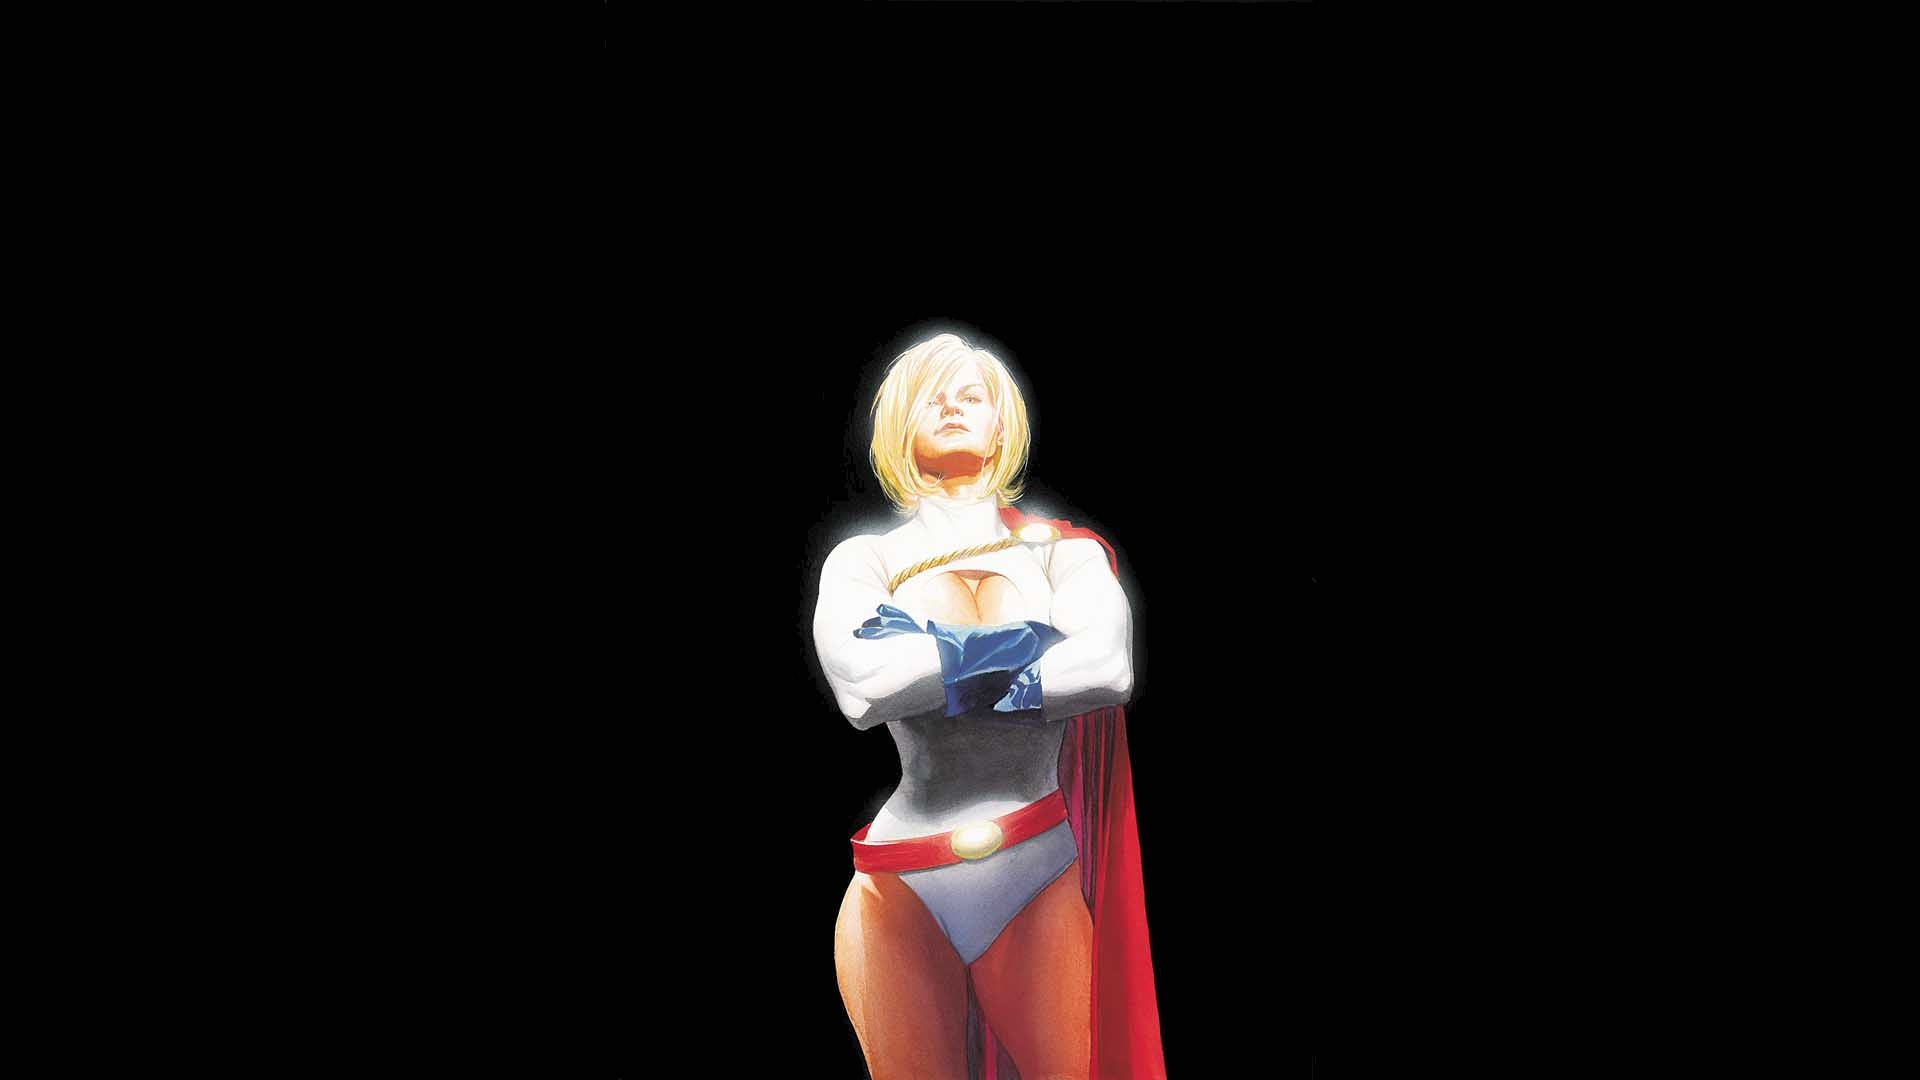 comics, justice society of america, belt, blonde, cape, glove, power girl, justice league